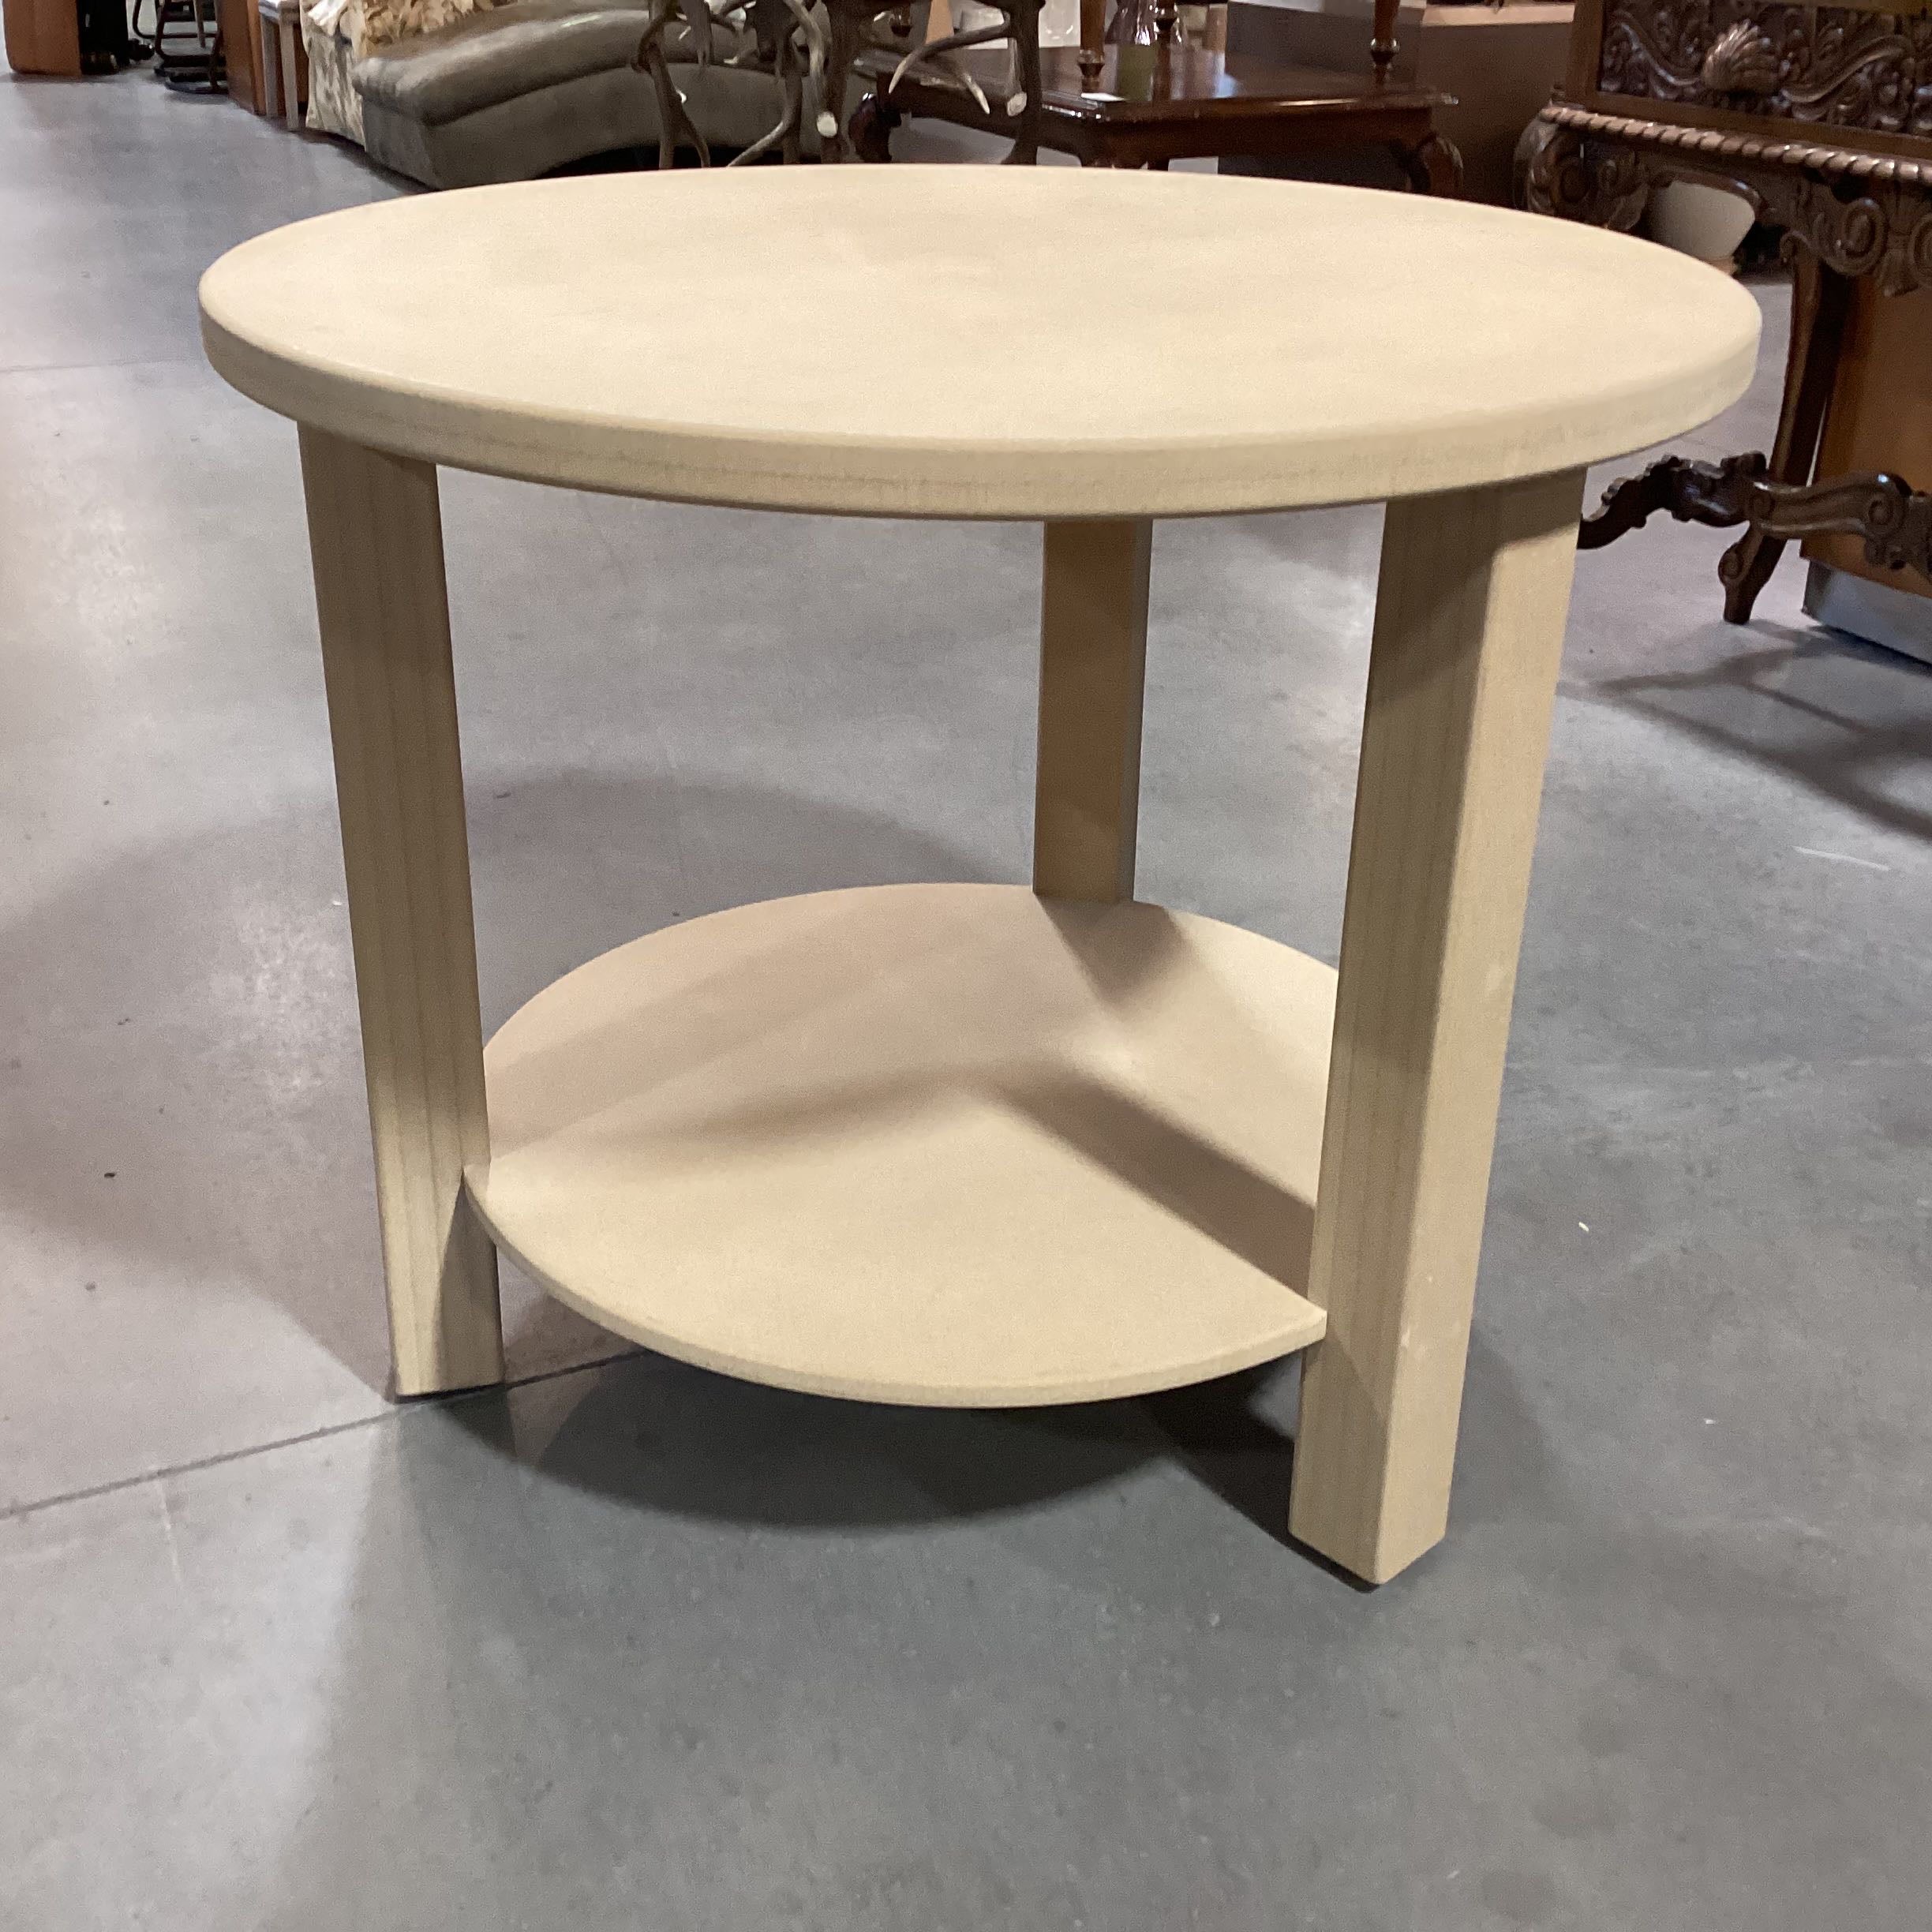 2 Tiered Composite Wood Unfinished Accent Table